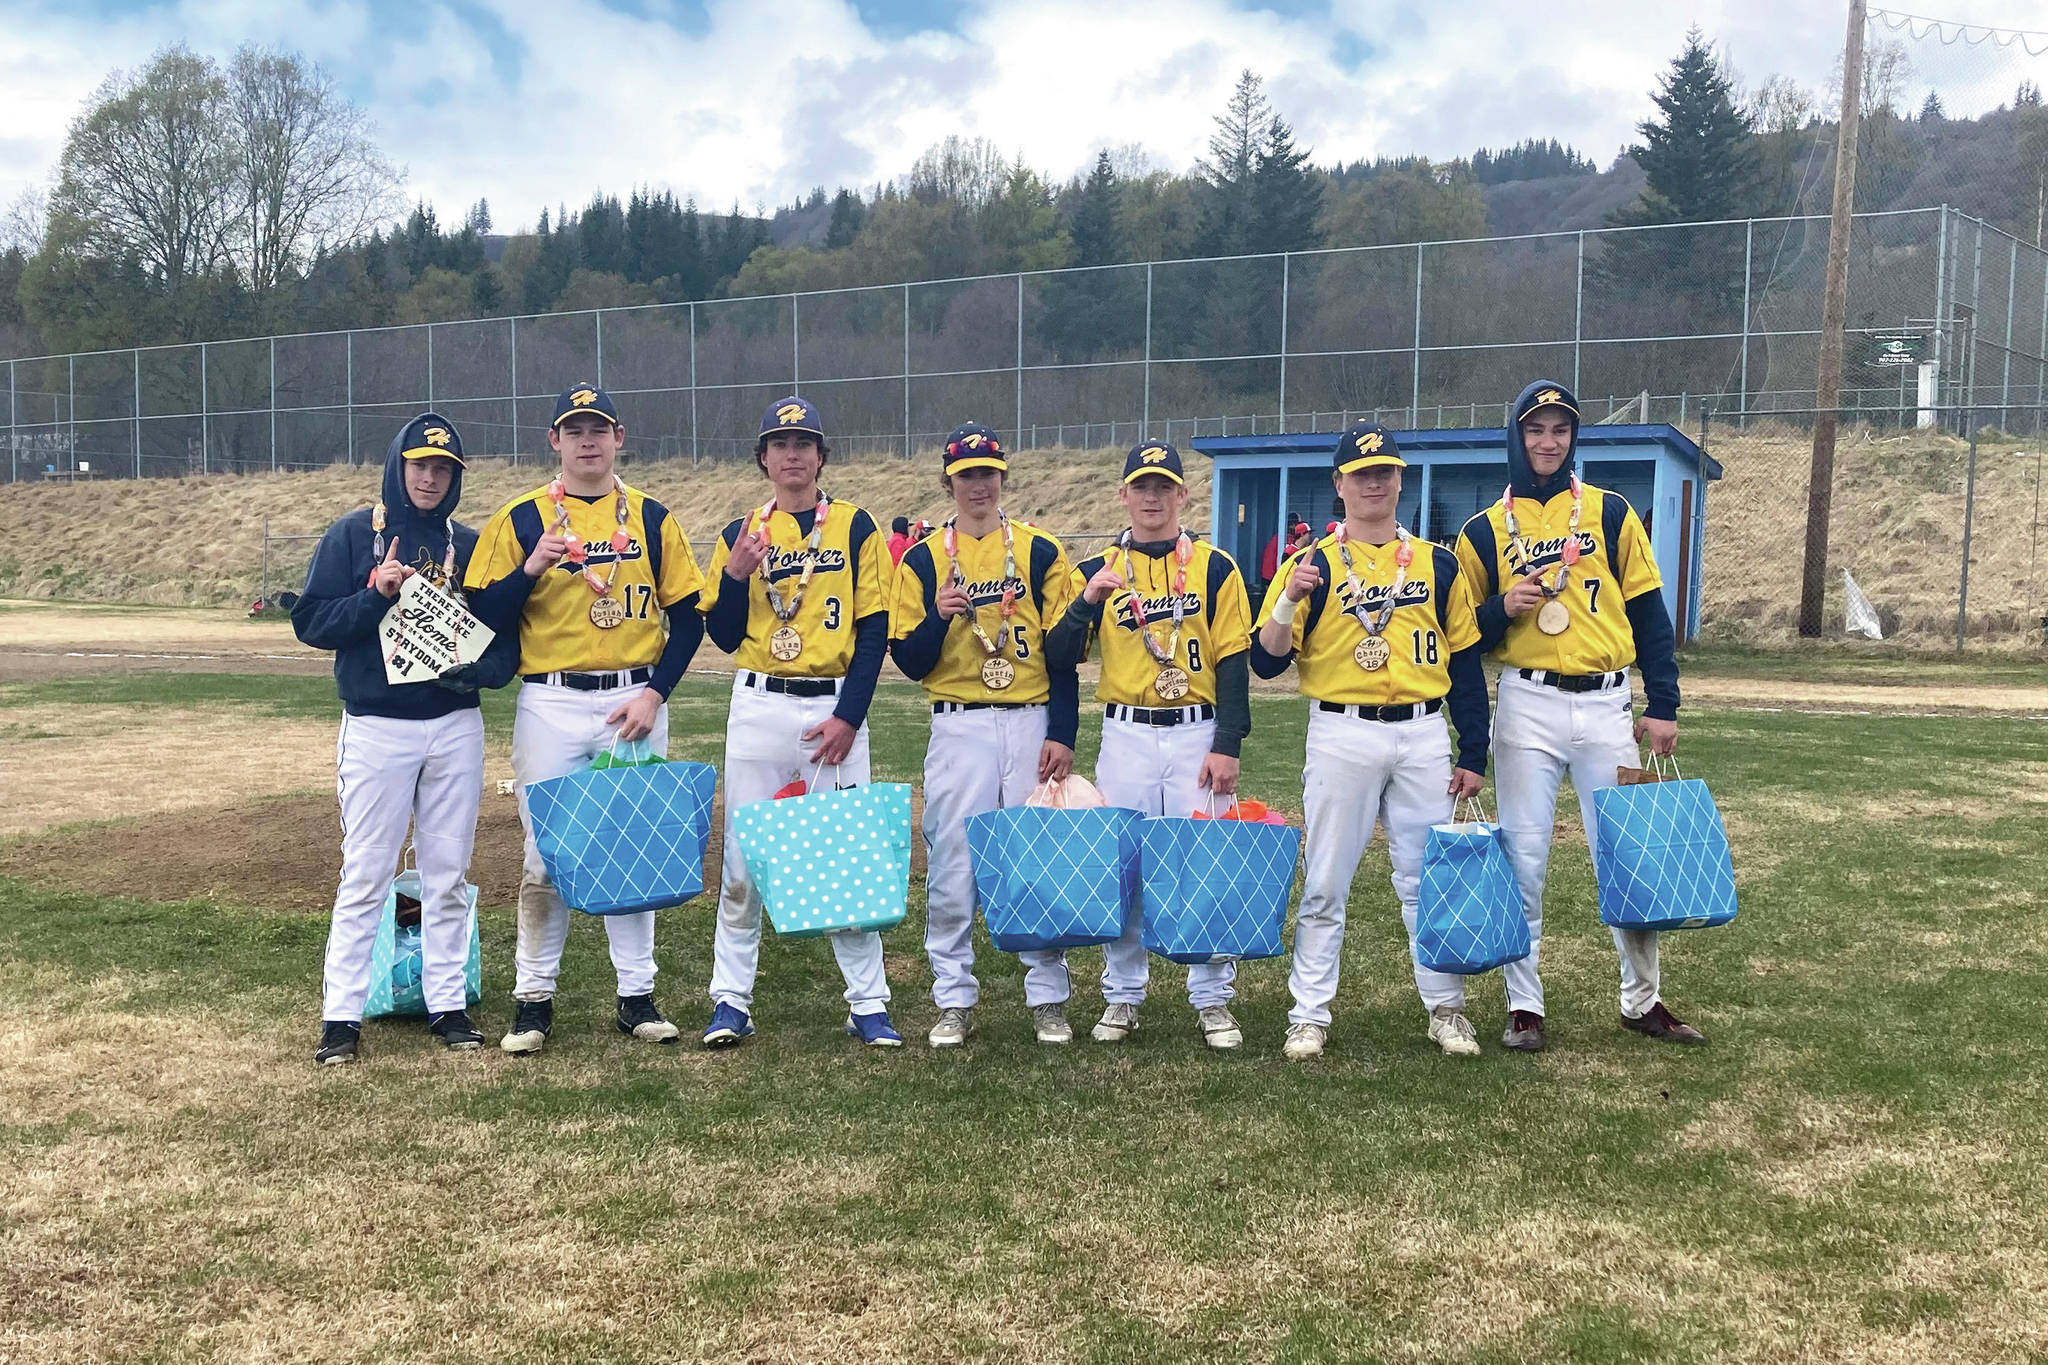 Seven seniors on the Homer High School baseball team were honored Saturday, May 22 during senior night. The team won against Kenai 11-3. Pictured left to right: Jack Strydom, Josiah Raymond, Liam Houlihan, Austin Ceccarelli, Harrison Metz, Charly Tappen and Coda Wood. (Photo by Sarah Knapp/Homer News)